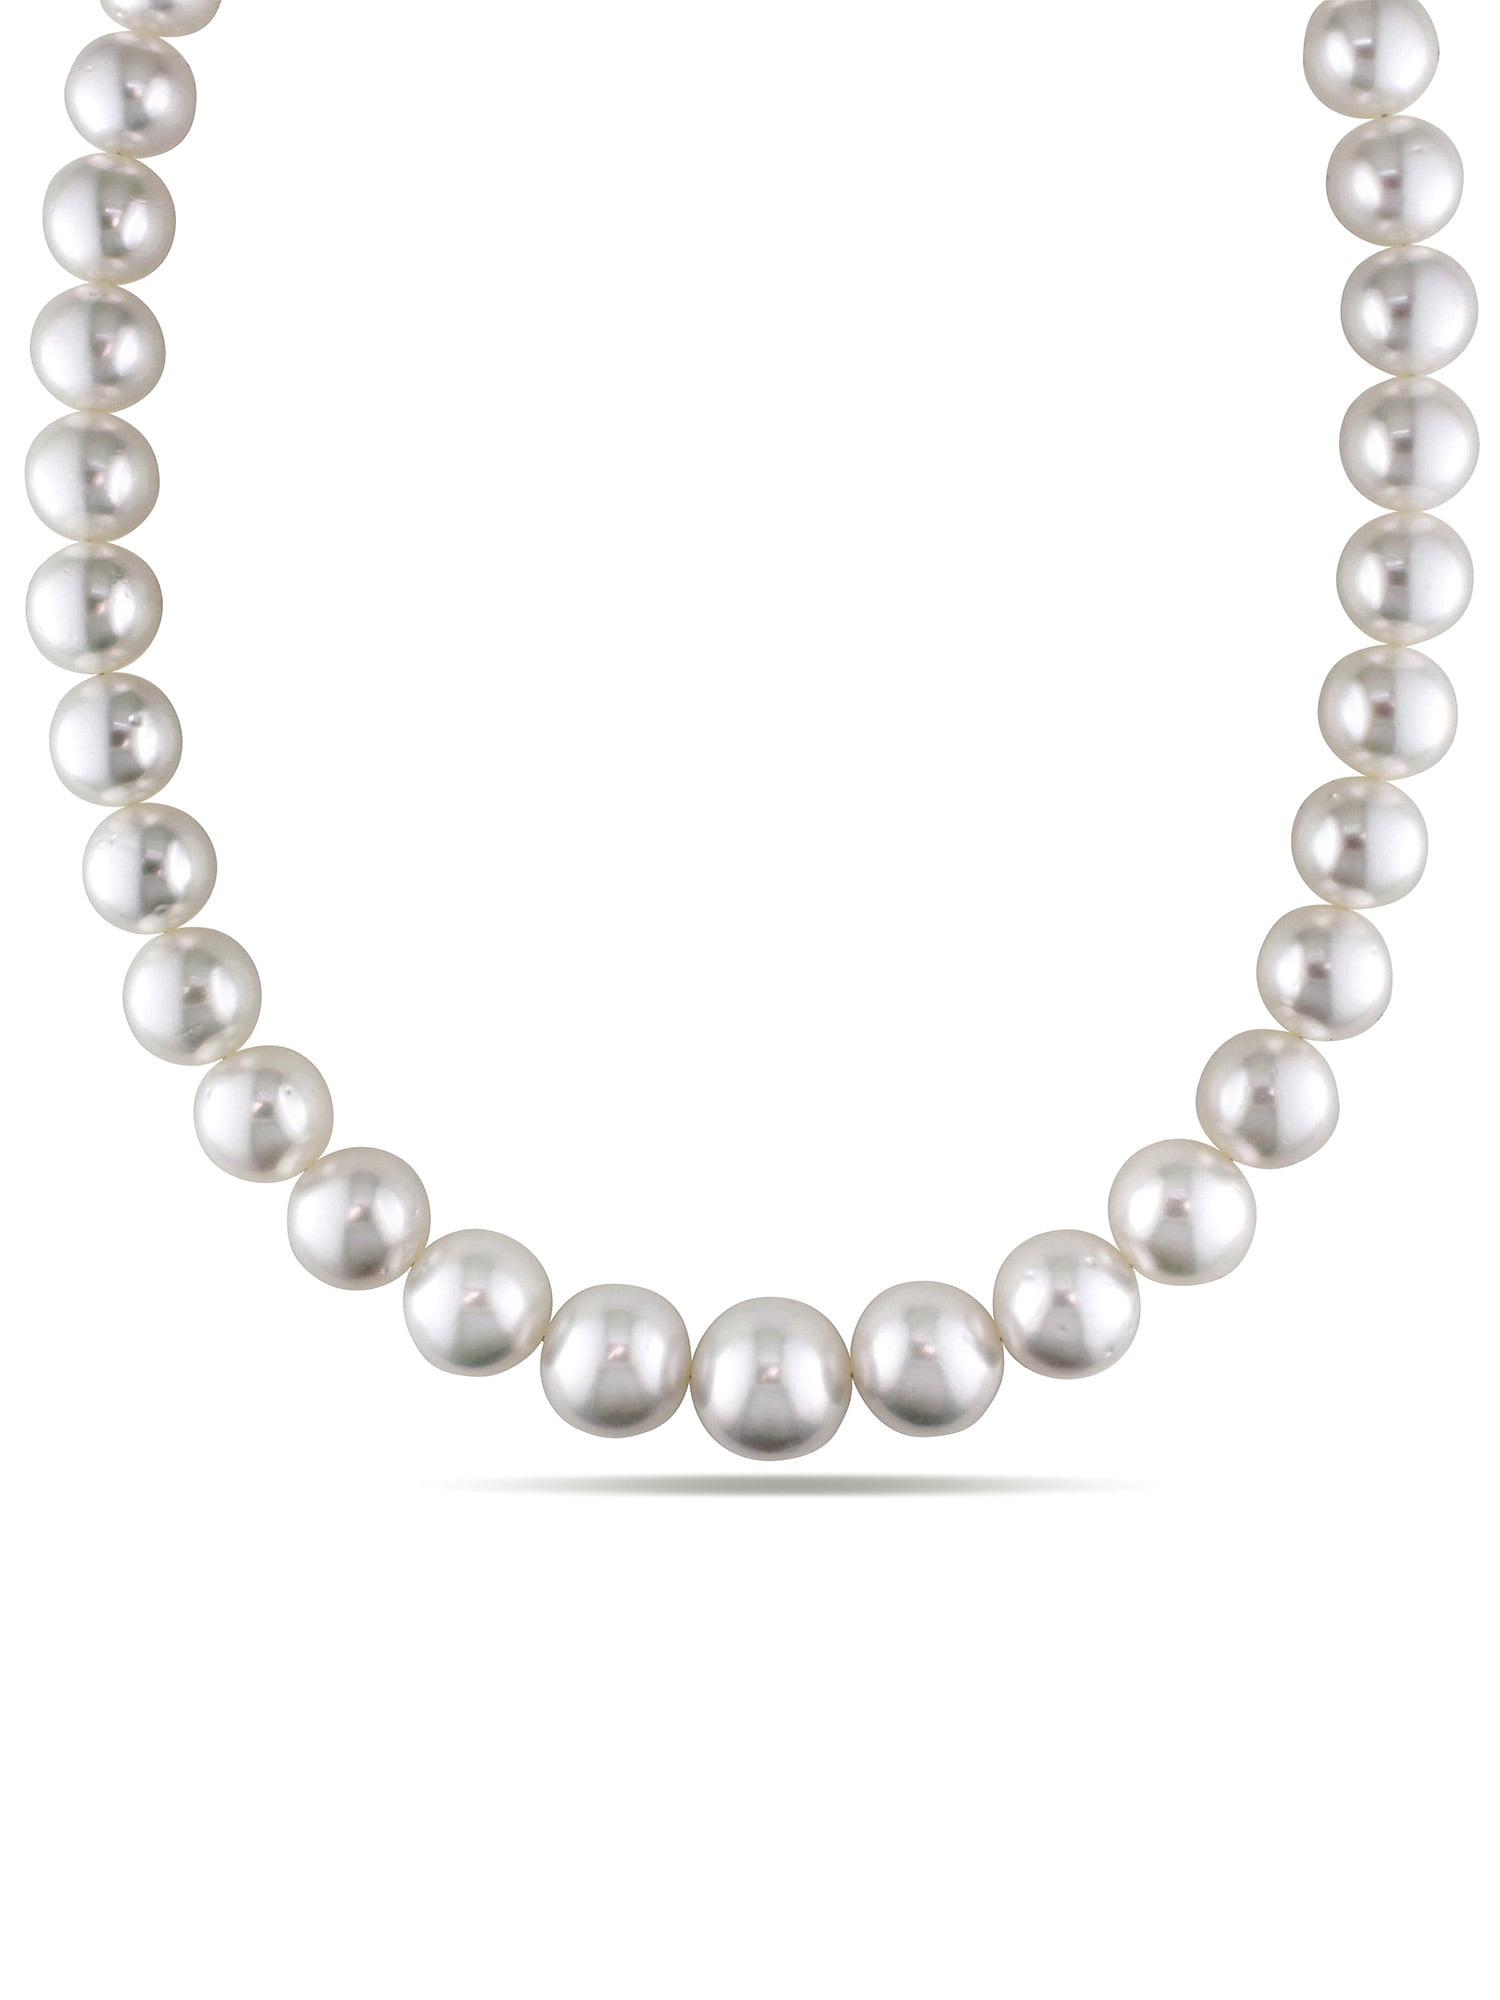 14K Gold clasp 10-11MM White South Sea Round Pearl Necklace 18 inch